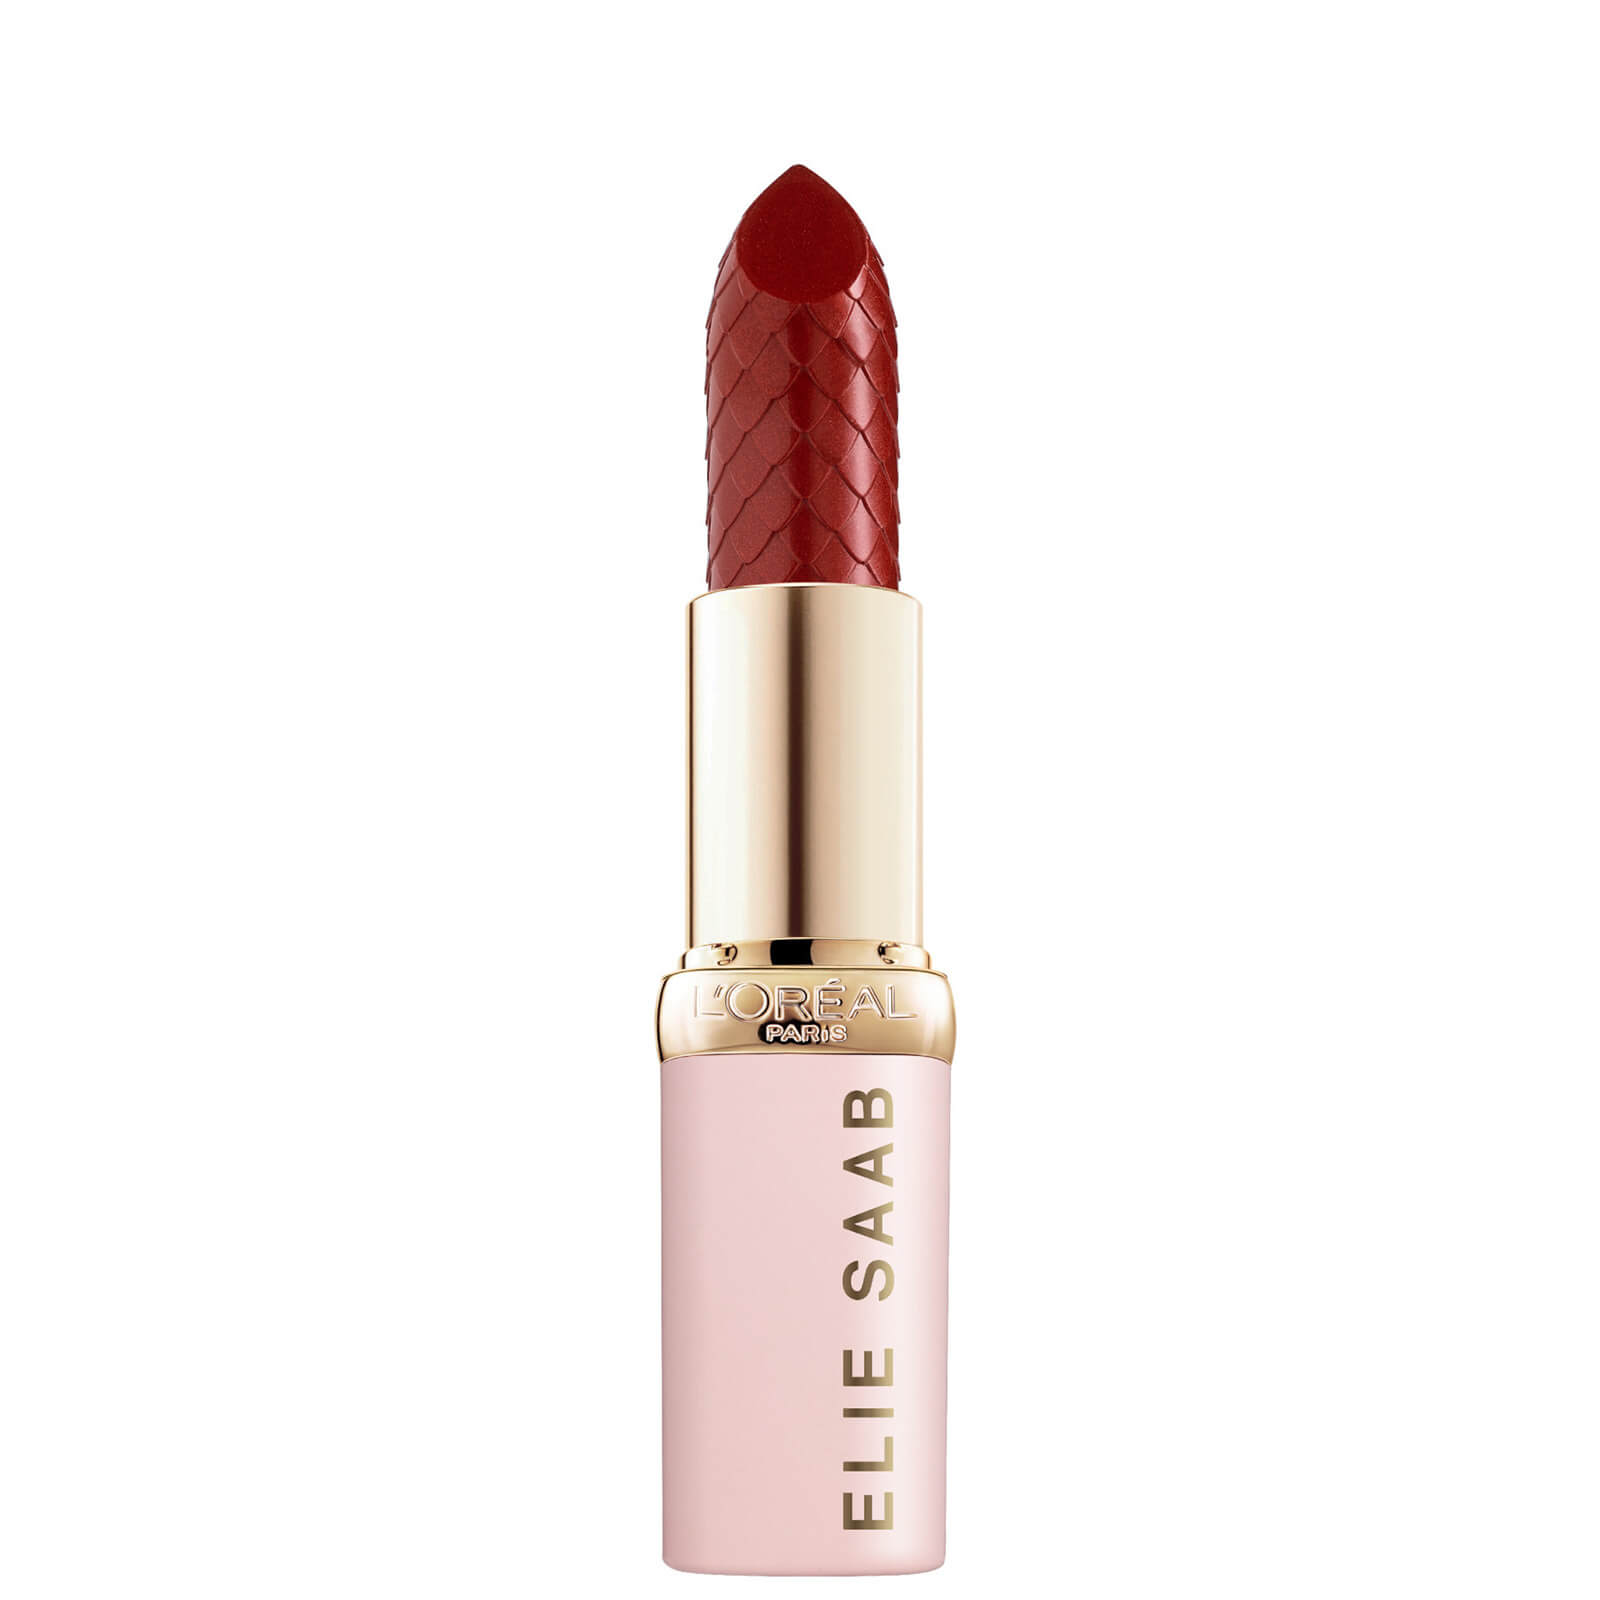 L'Oreal Paris X Elie Saab Bridal Collection, Limited Edition Color Riche Lipstick 24.1g (Various Shades) - 04 Red